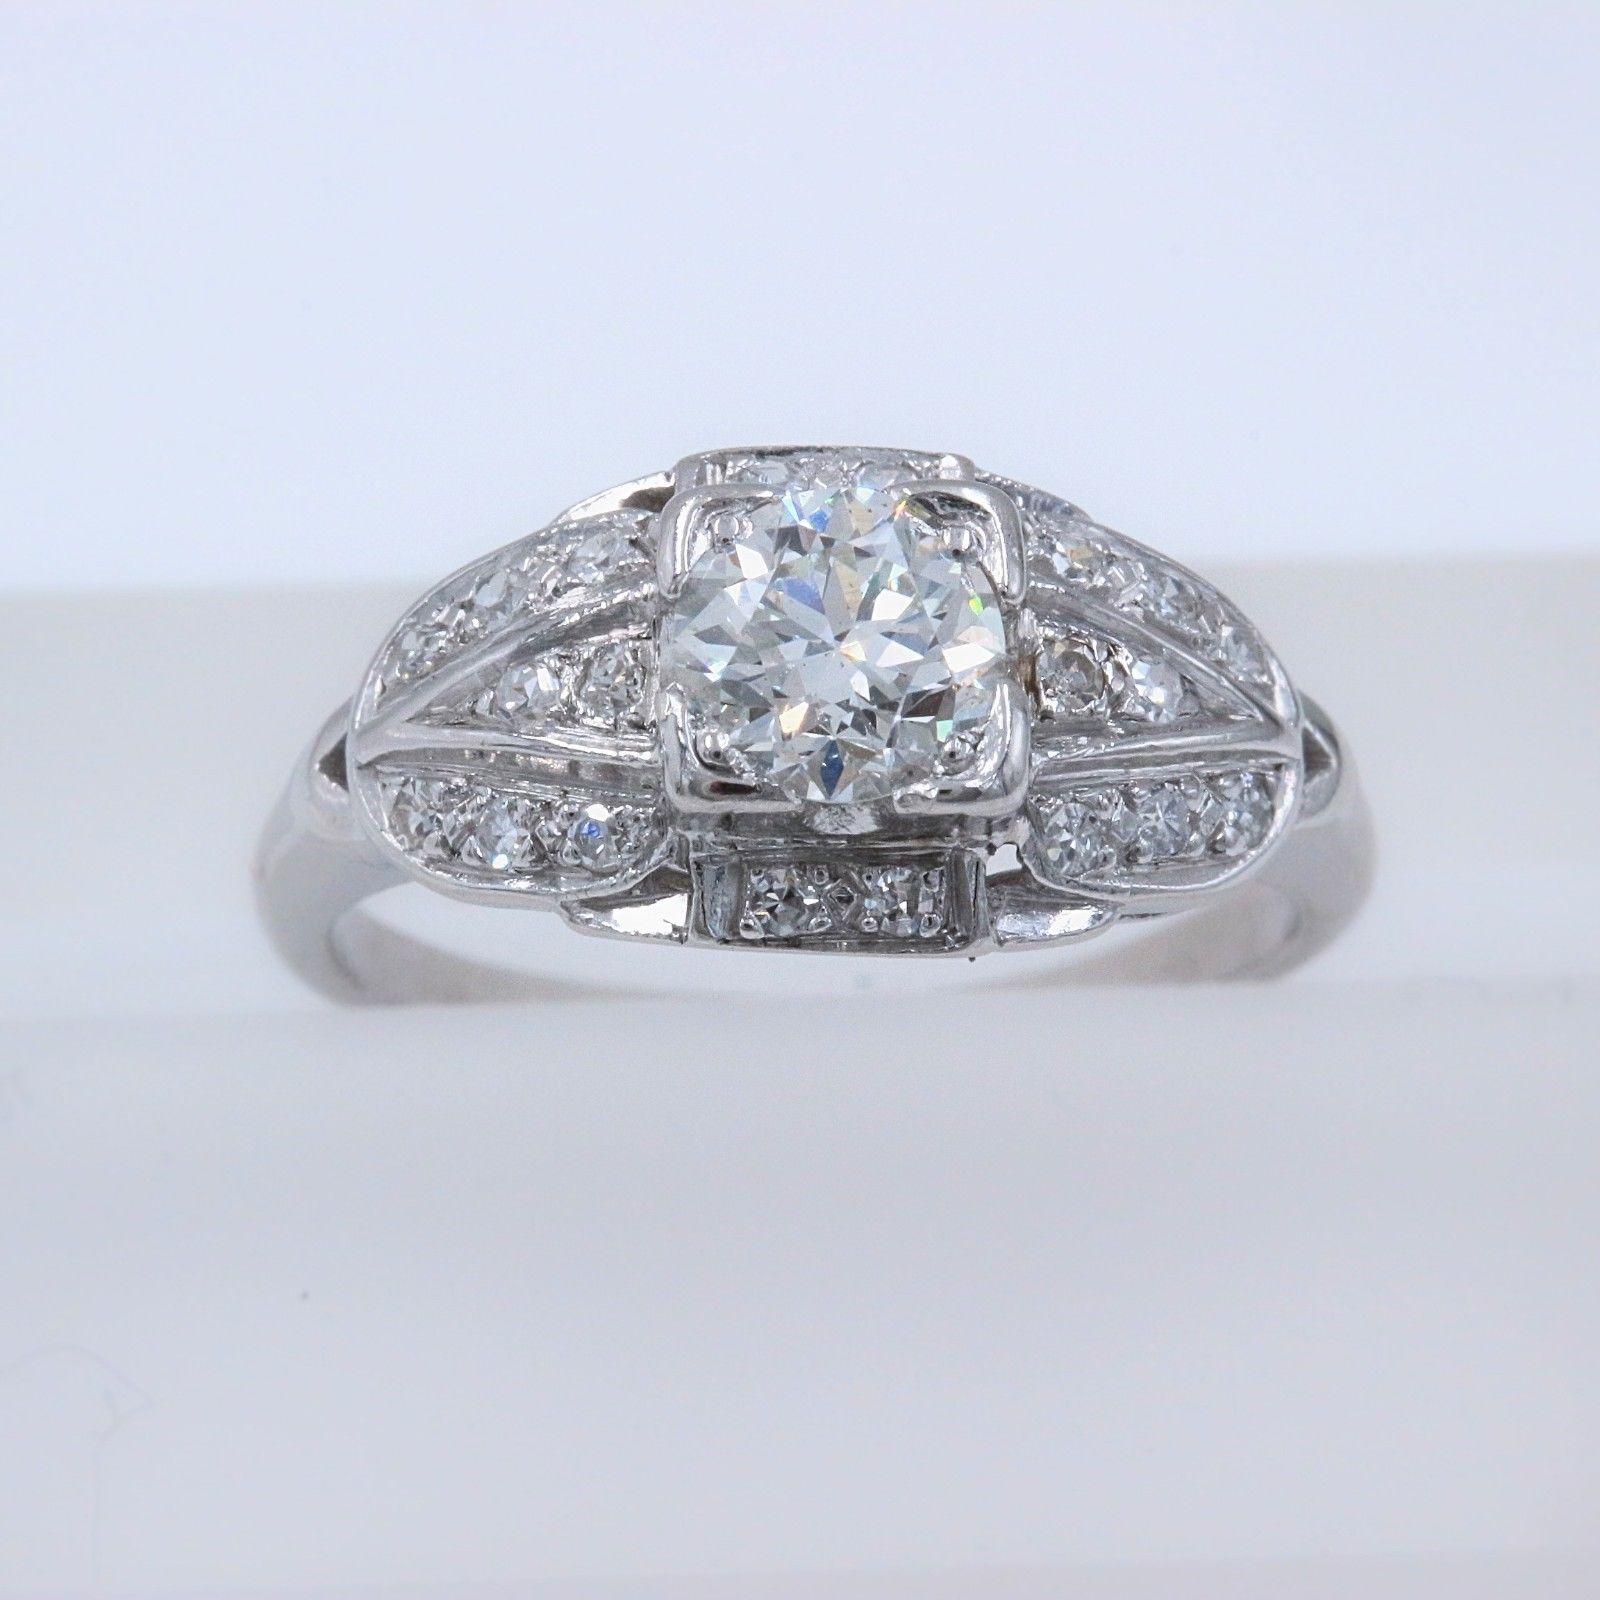 Vintage Platinum Diamond Engagement Ring Old Cuts 1.08 Carat In Good Condition For Sale In San Diego, CA